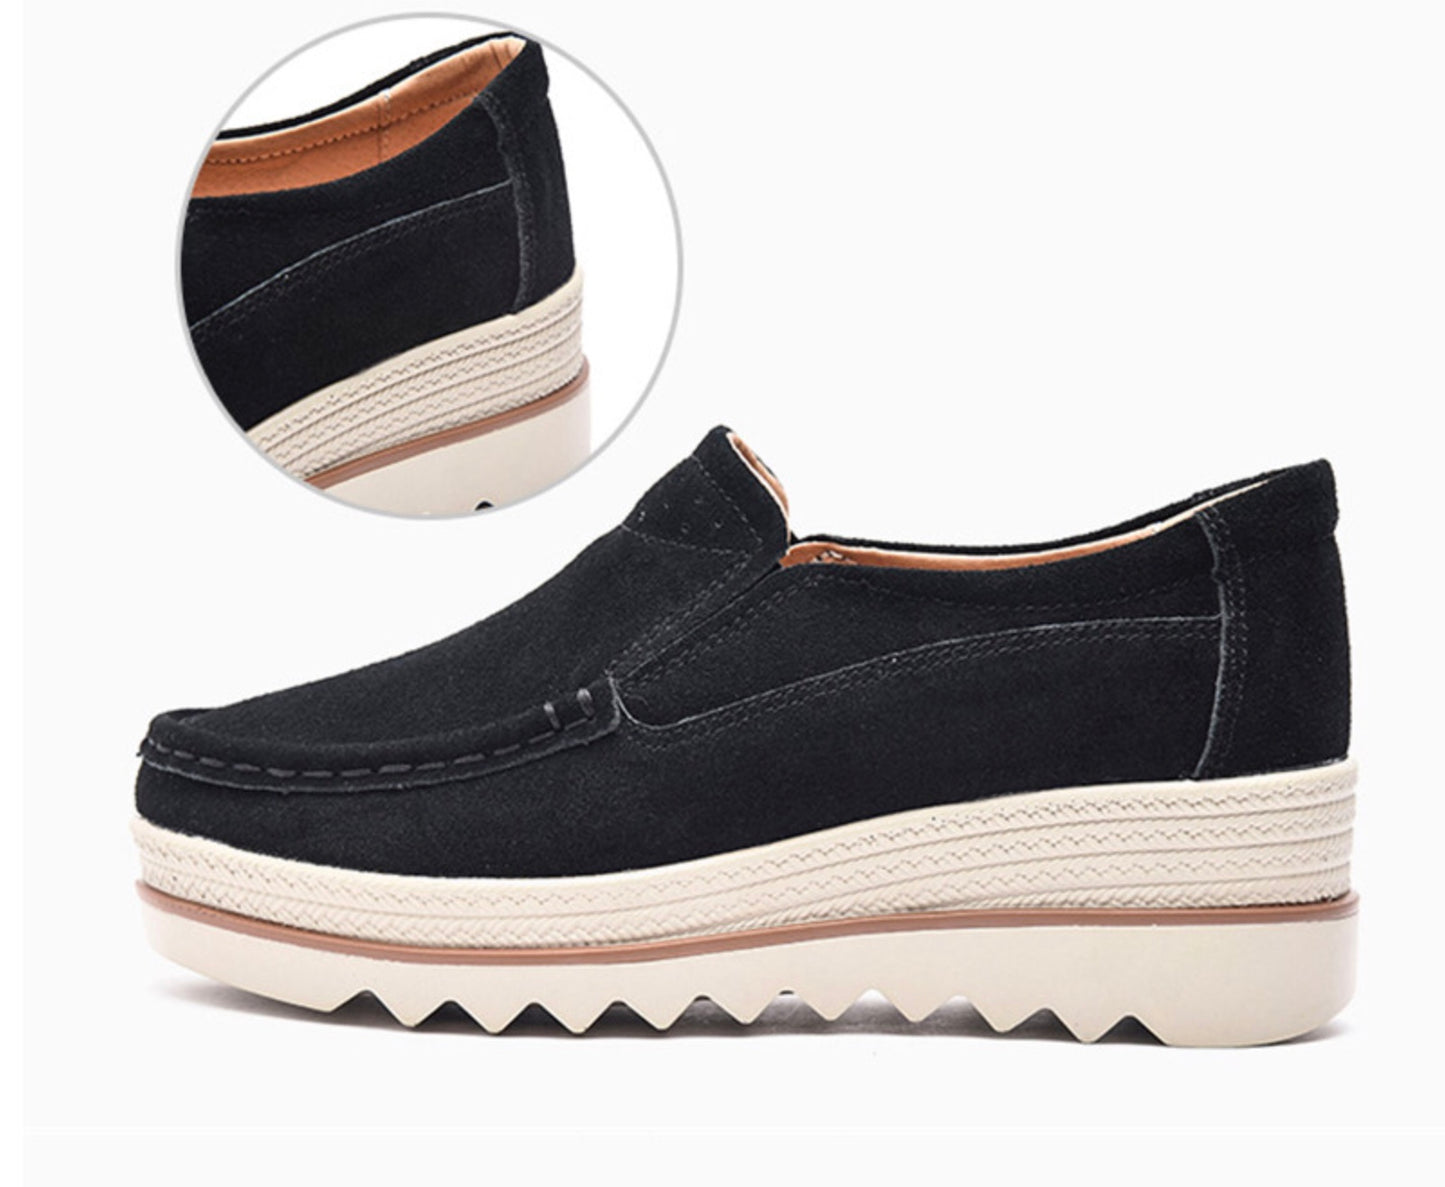 Women’s Genuine Leather Loafers Slip On Casual Platform Shoes